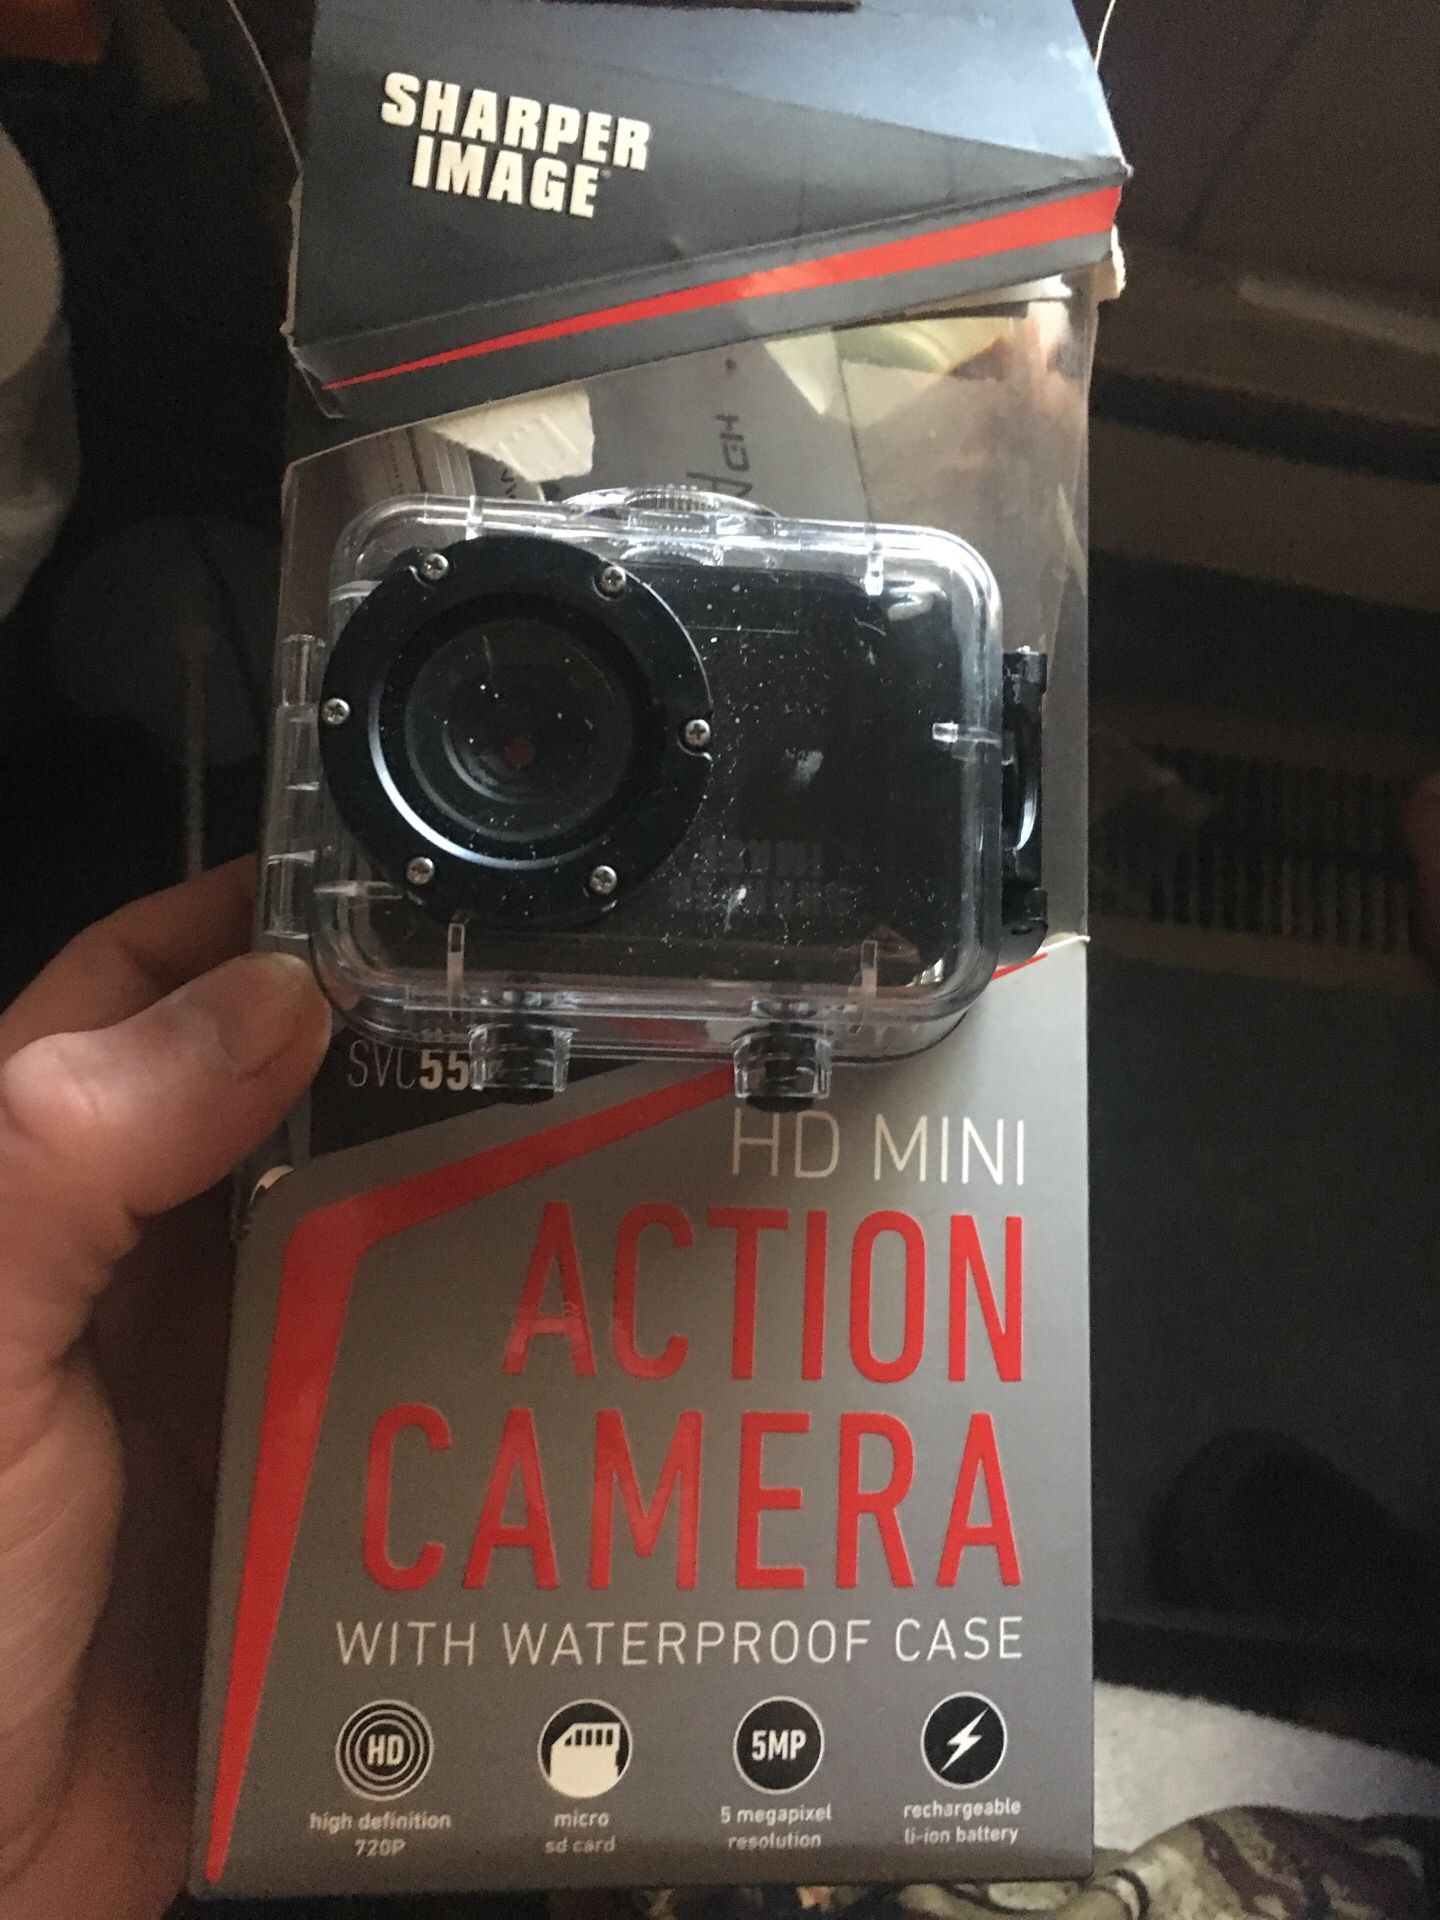 Action camera brand new never used